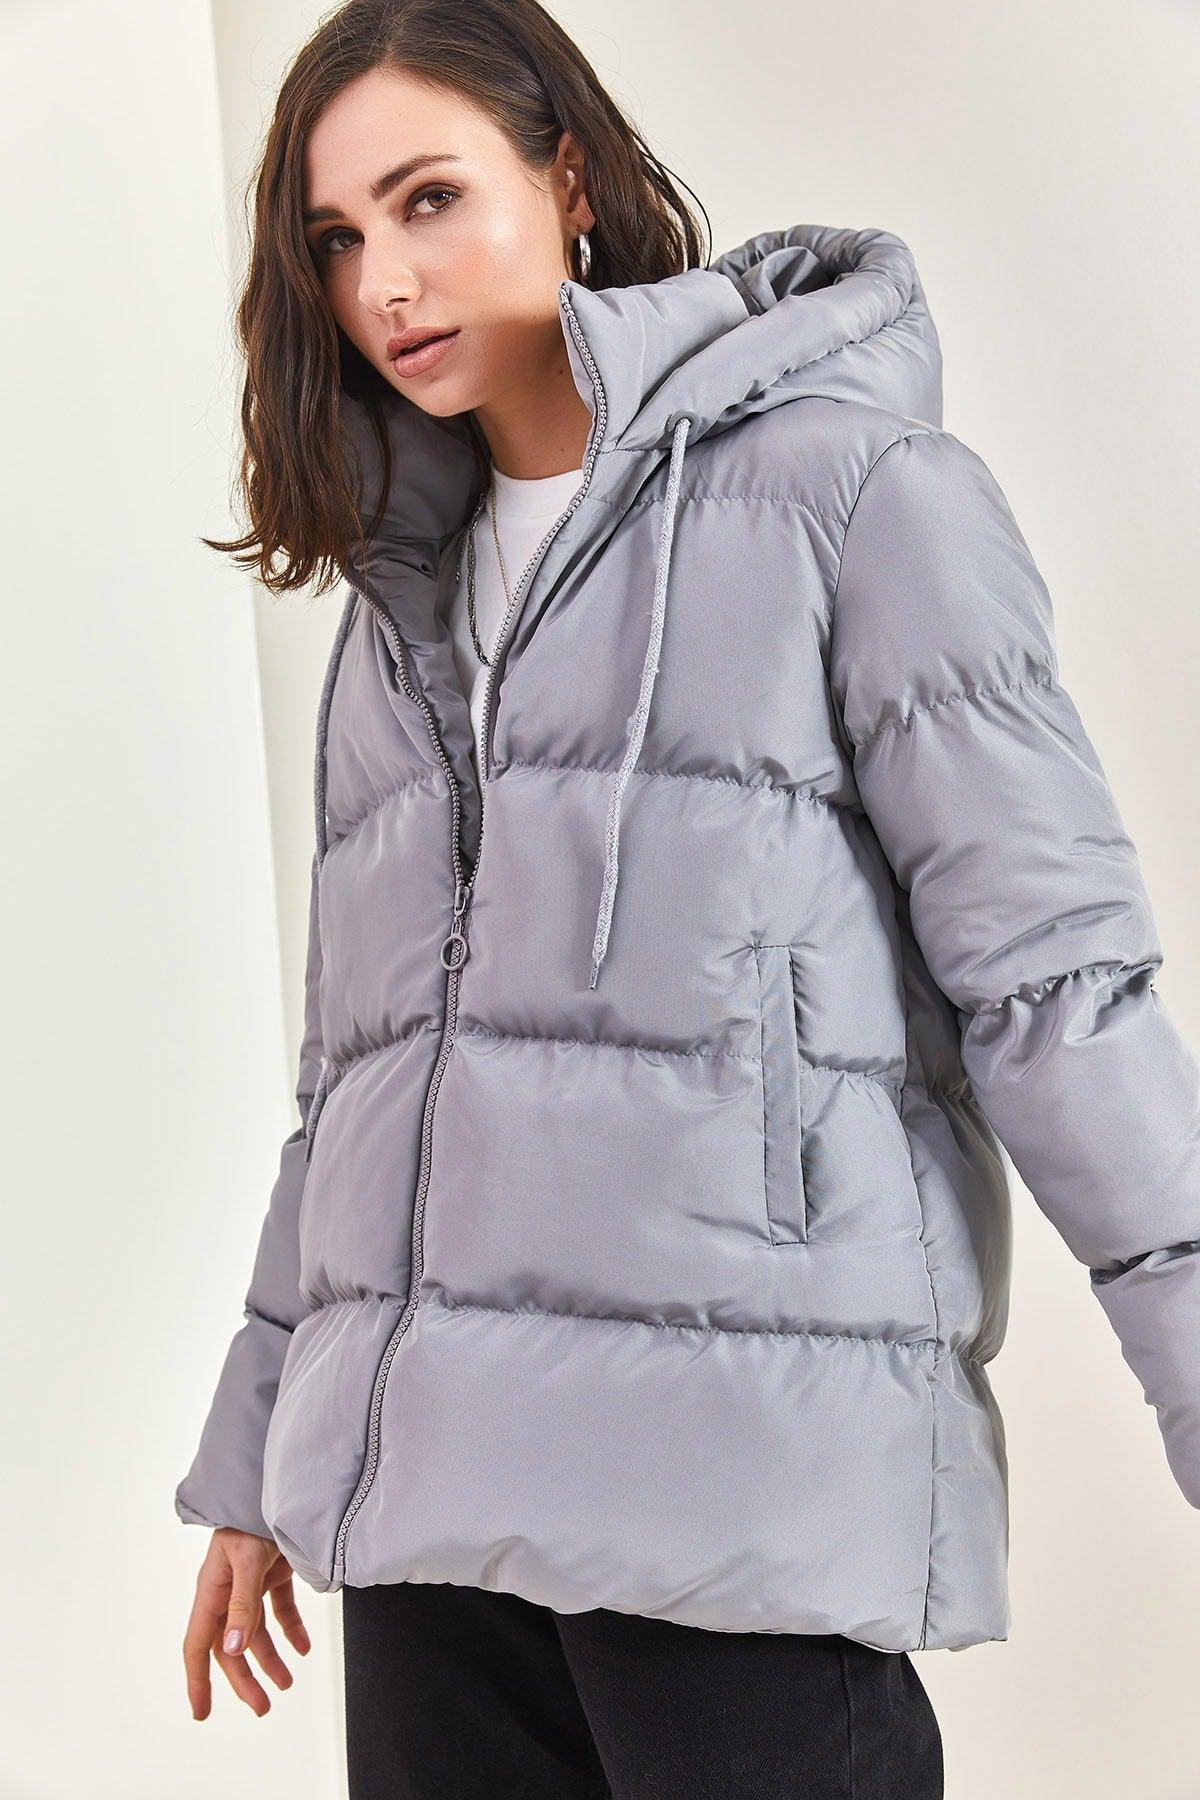 Women's Hooded Long Down Jacket with Lace-Up - Swordslife